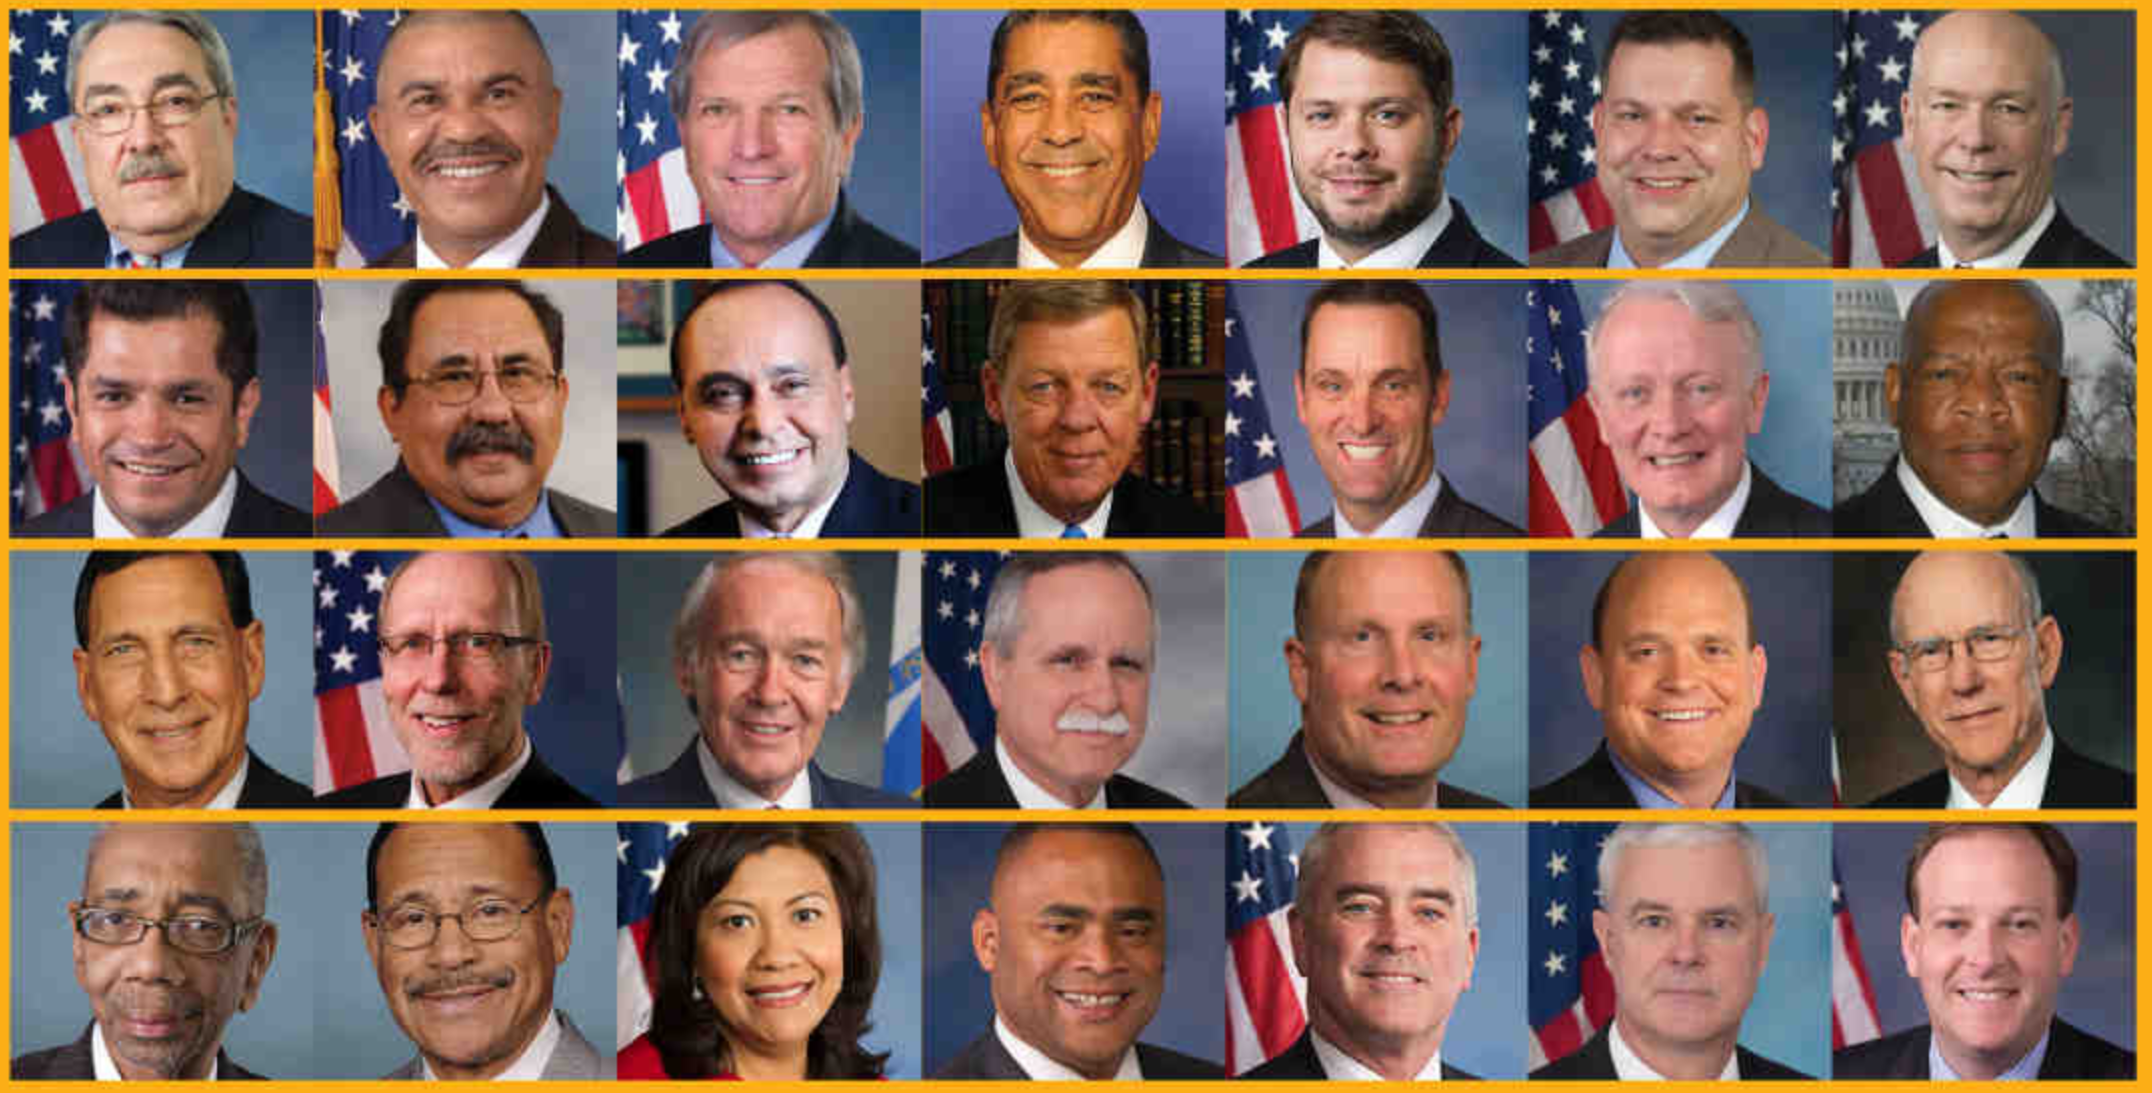 Picture of the congresspeople matched to criminal mugshots by Amazon software, they are disproportionately people of color